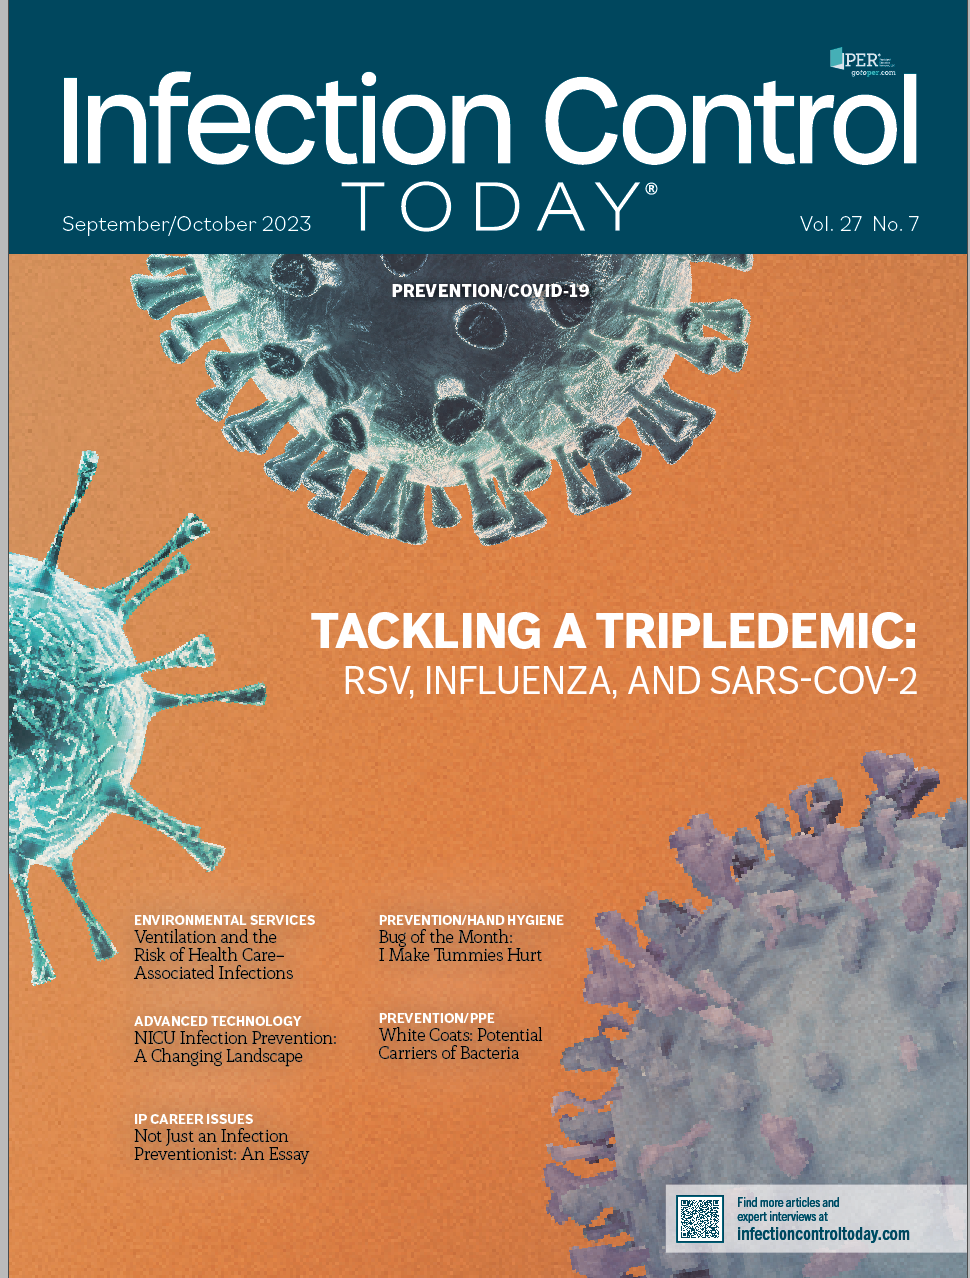 Infection Control Today, September/October 2023 (Vol. 27 No. 7)